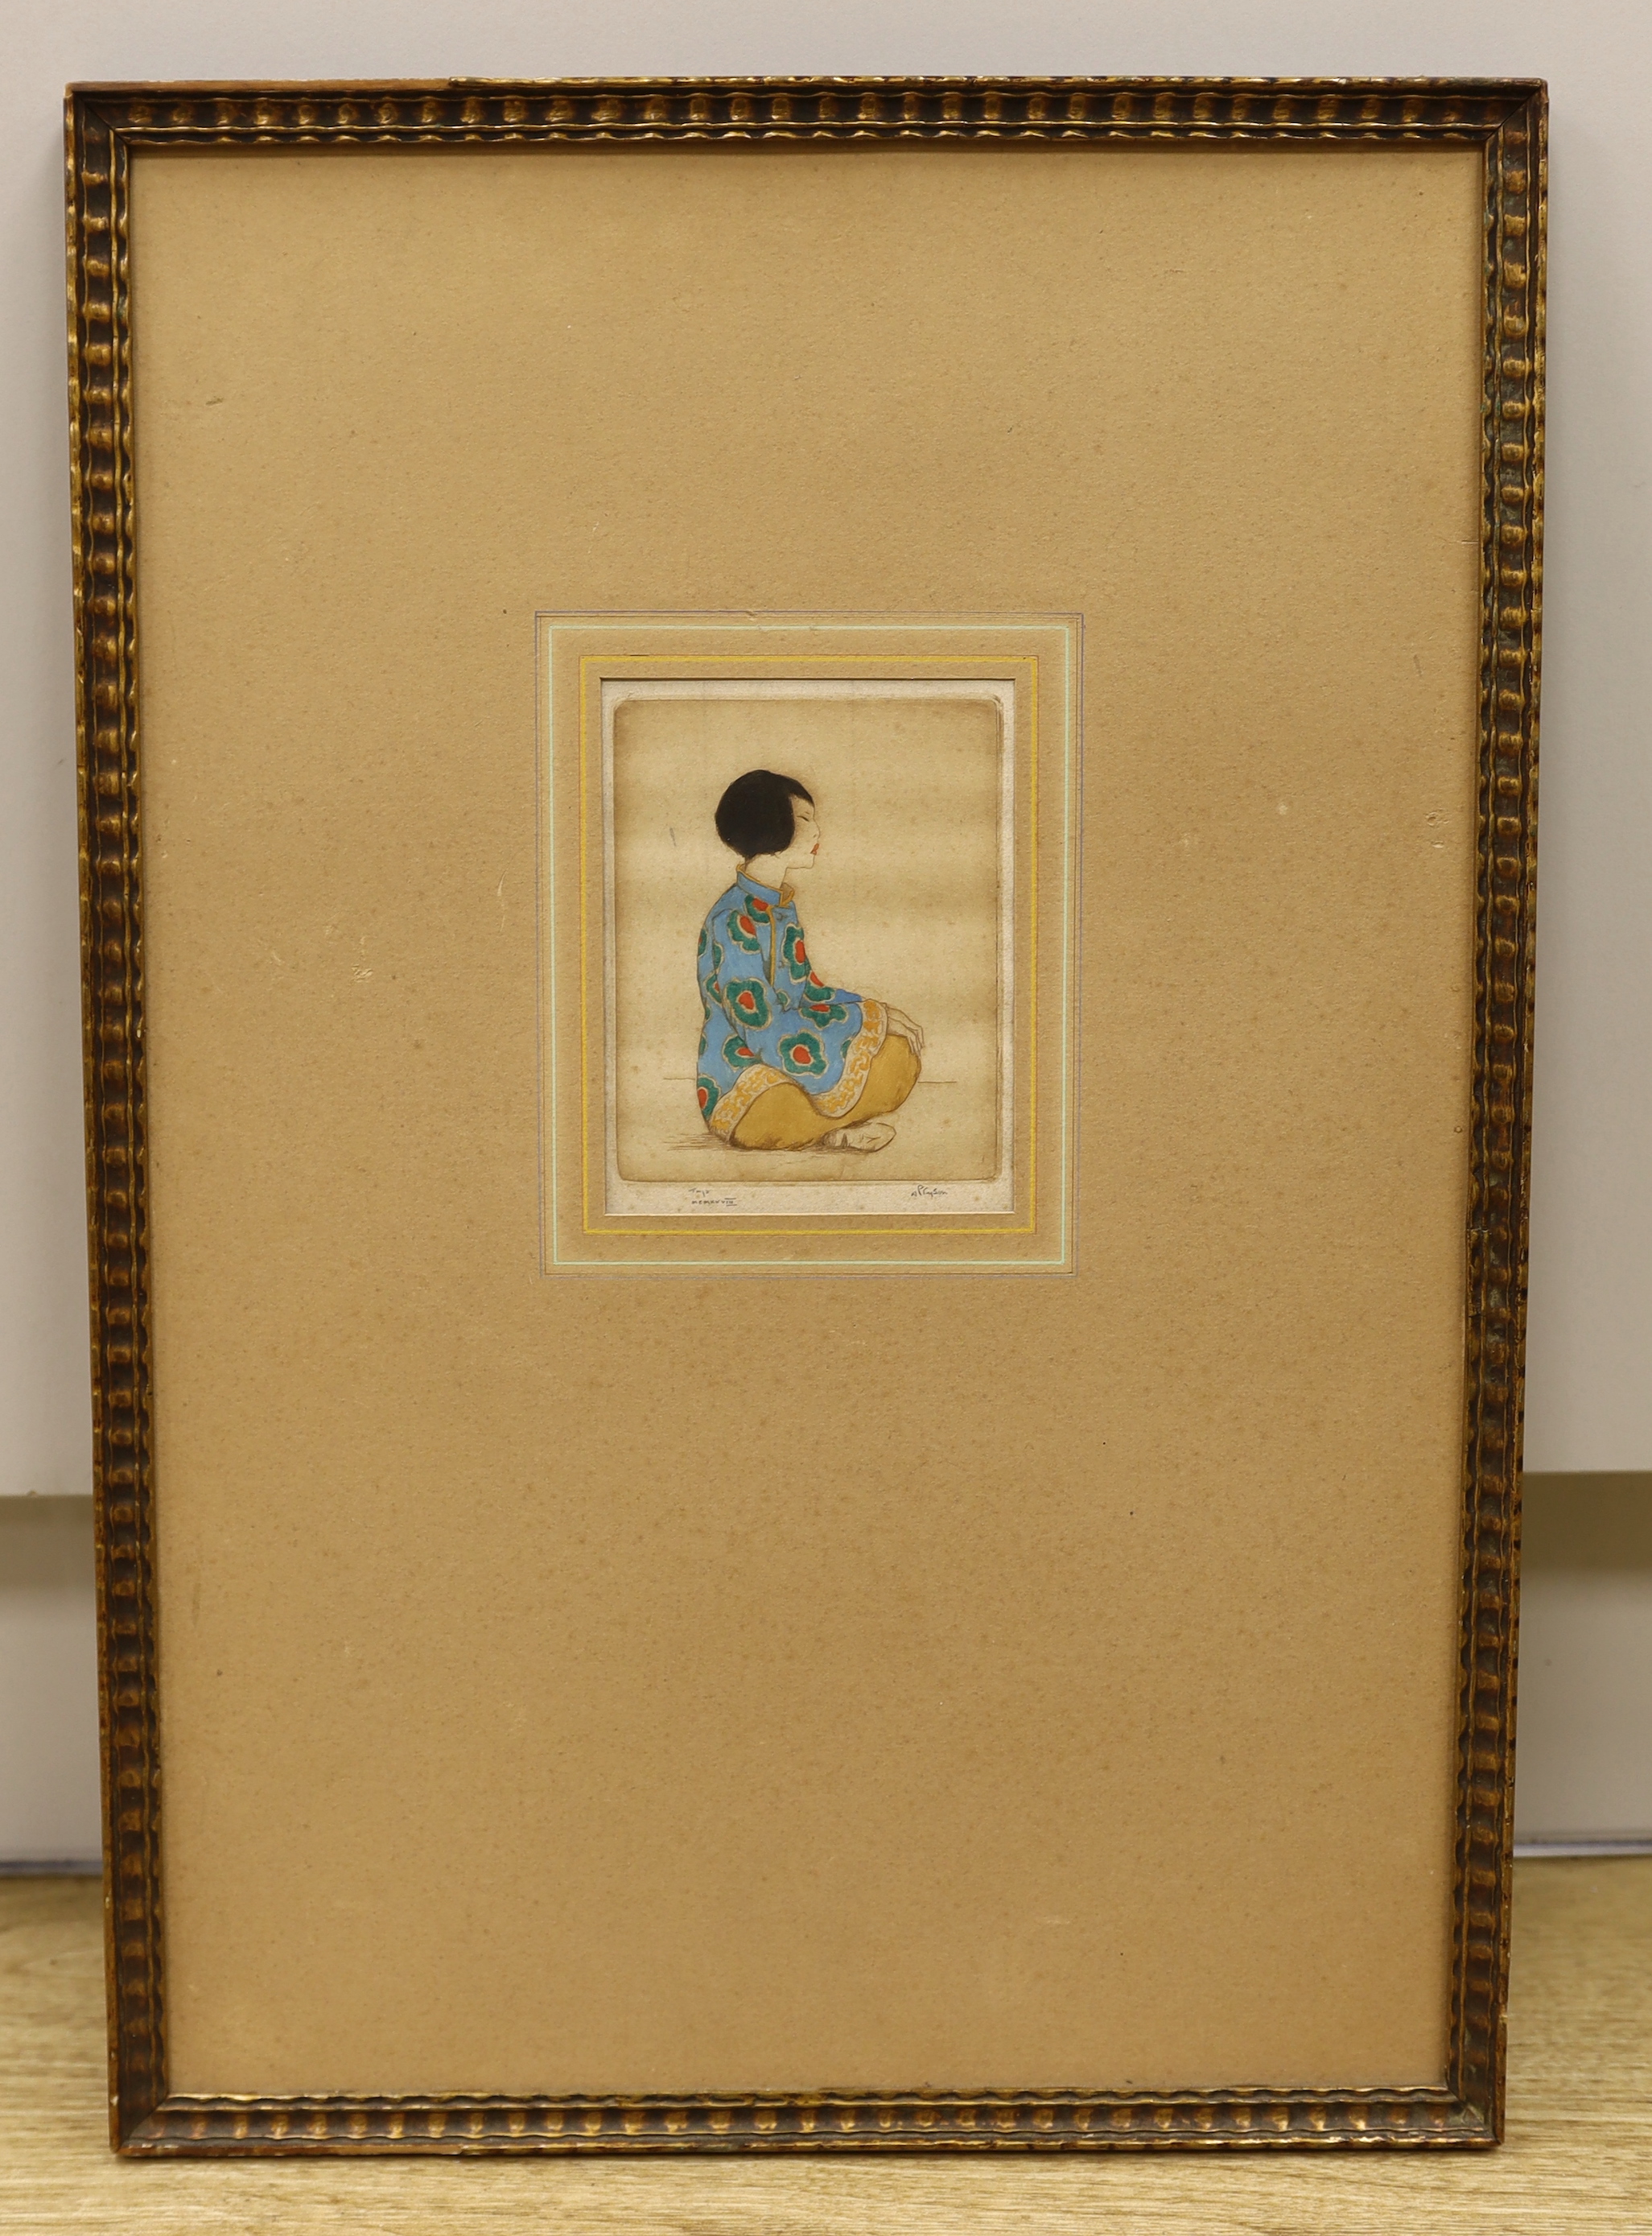 Dorsey Potter Tyson (American, 1891- 1969), colour etching, ‘Chinese Girl’, signed in pencil, 14 x 10.5cm